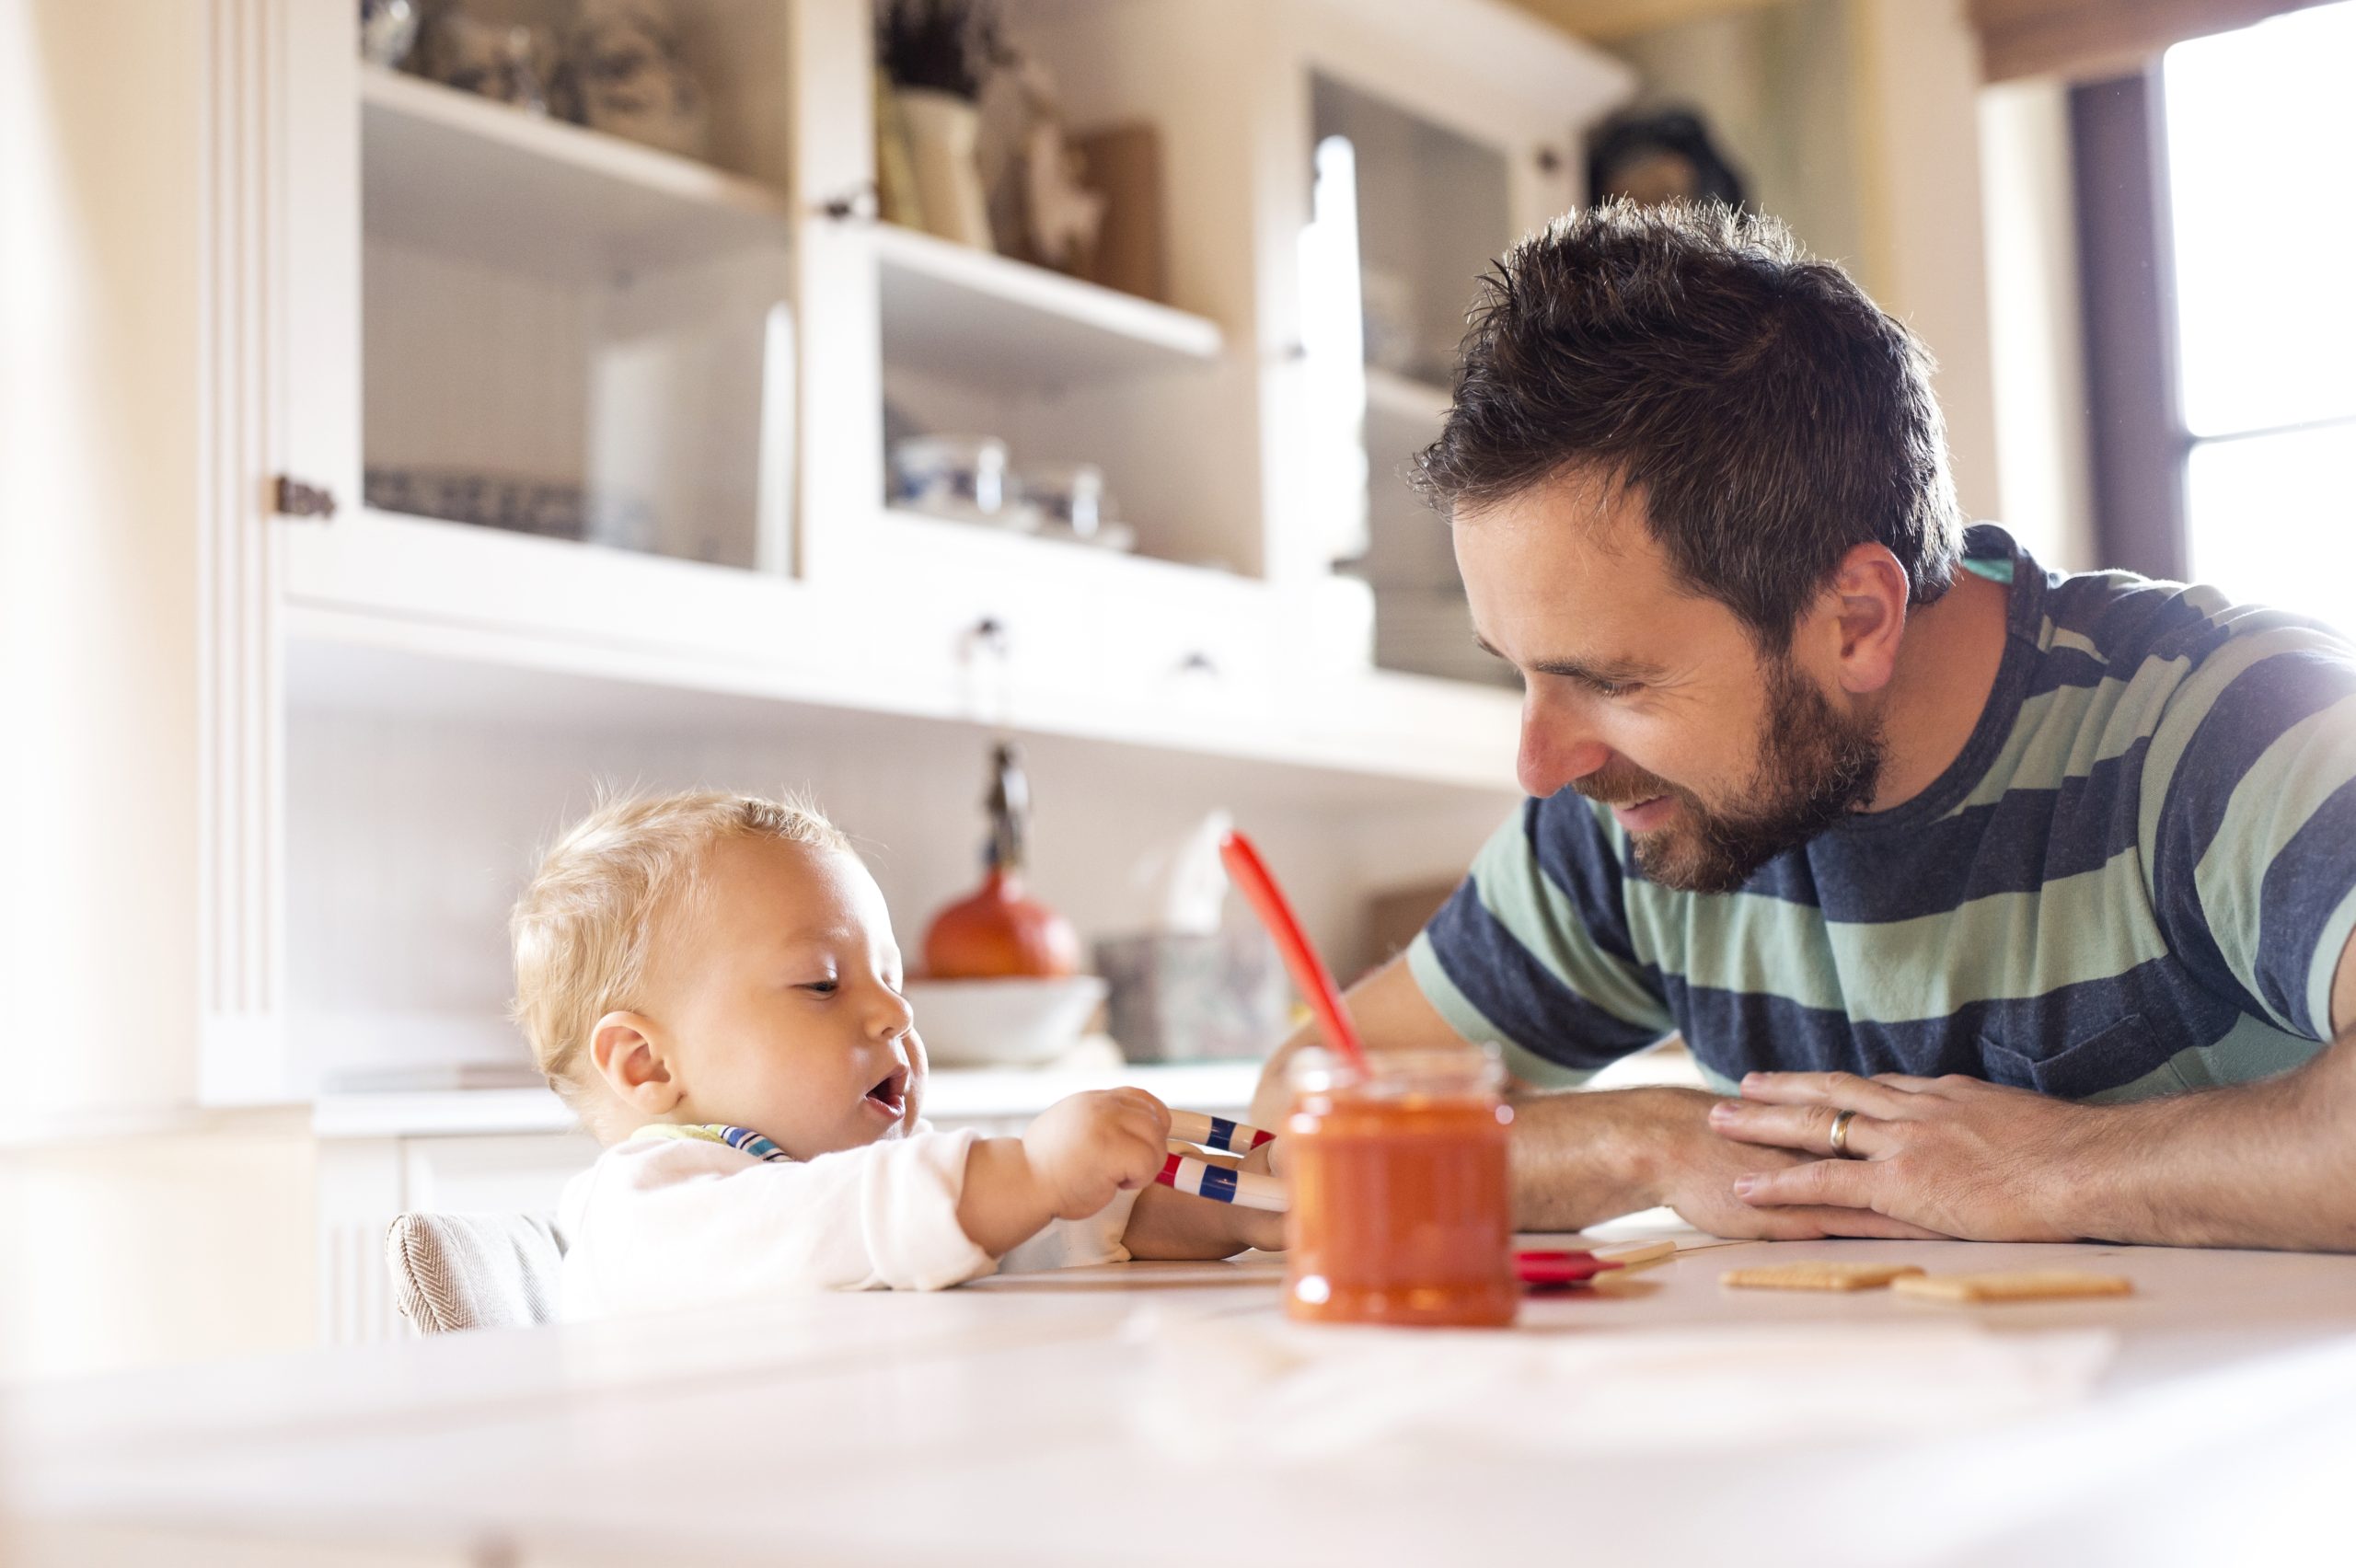 http://www.chicagopediatrictherapyandwellness.com/wp-content/uploads/2018/08/father-and-baby-at-home-at-dining-table-2022-03-08-01-22-06-utc-scaled.jpg